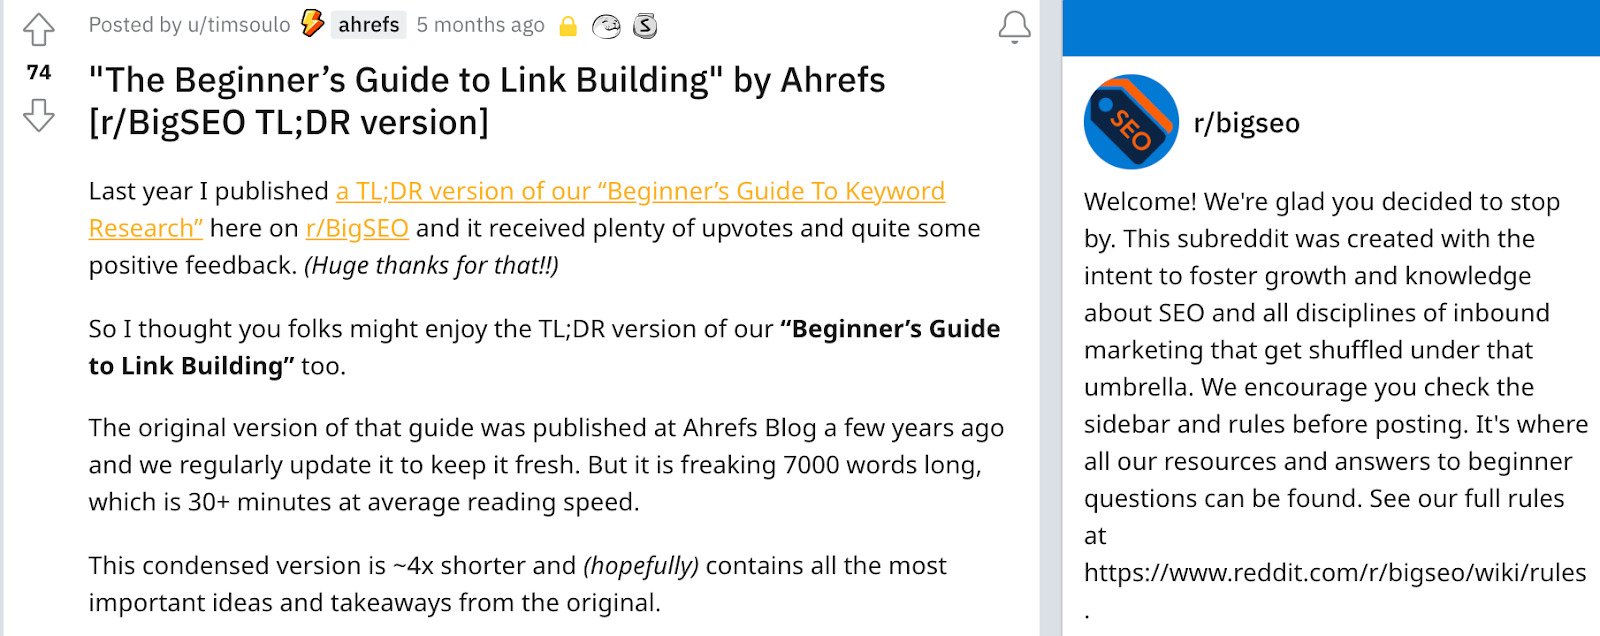 Tim's post about link building on r/bigseo